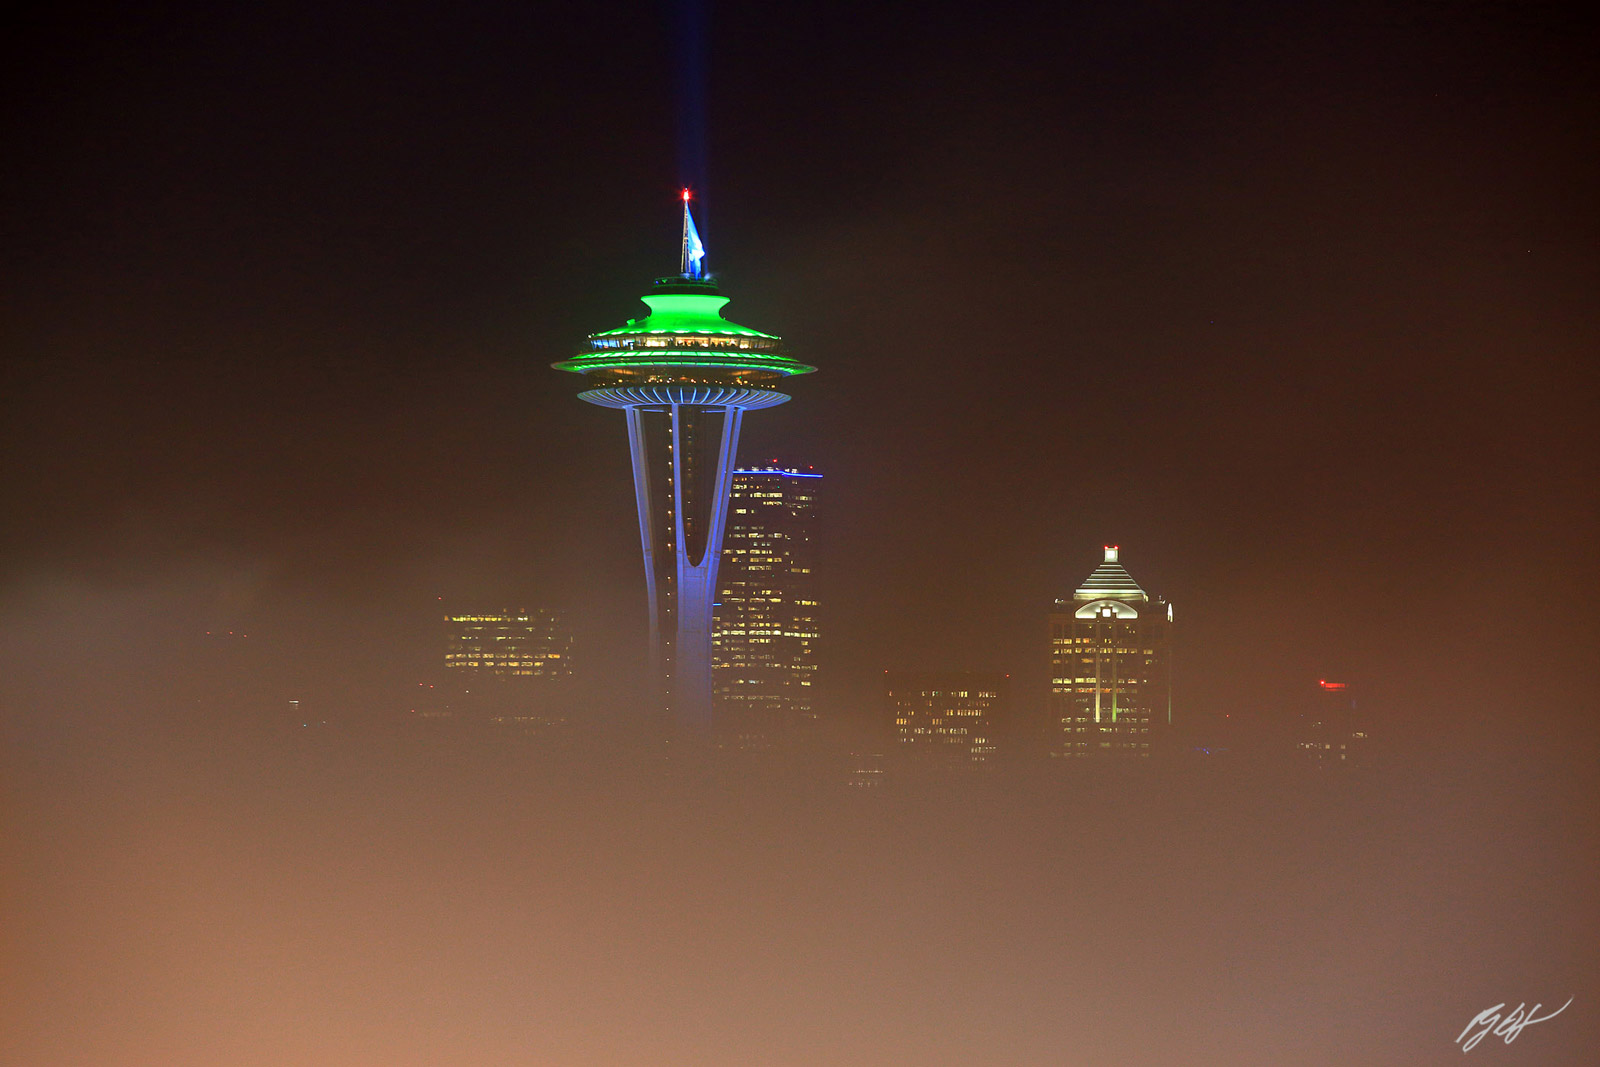 Space Needle Lost in Fog from Kerry Park on Queen Ann Hill in Seattle, Washington